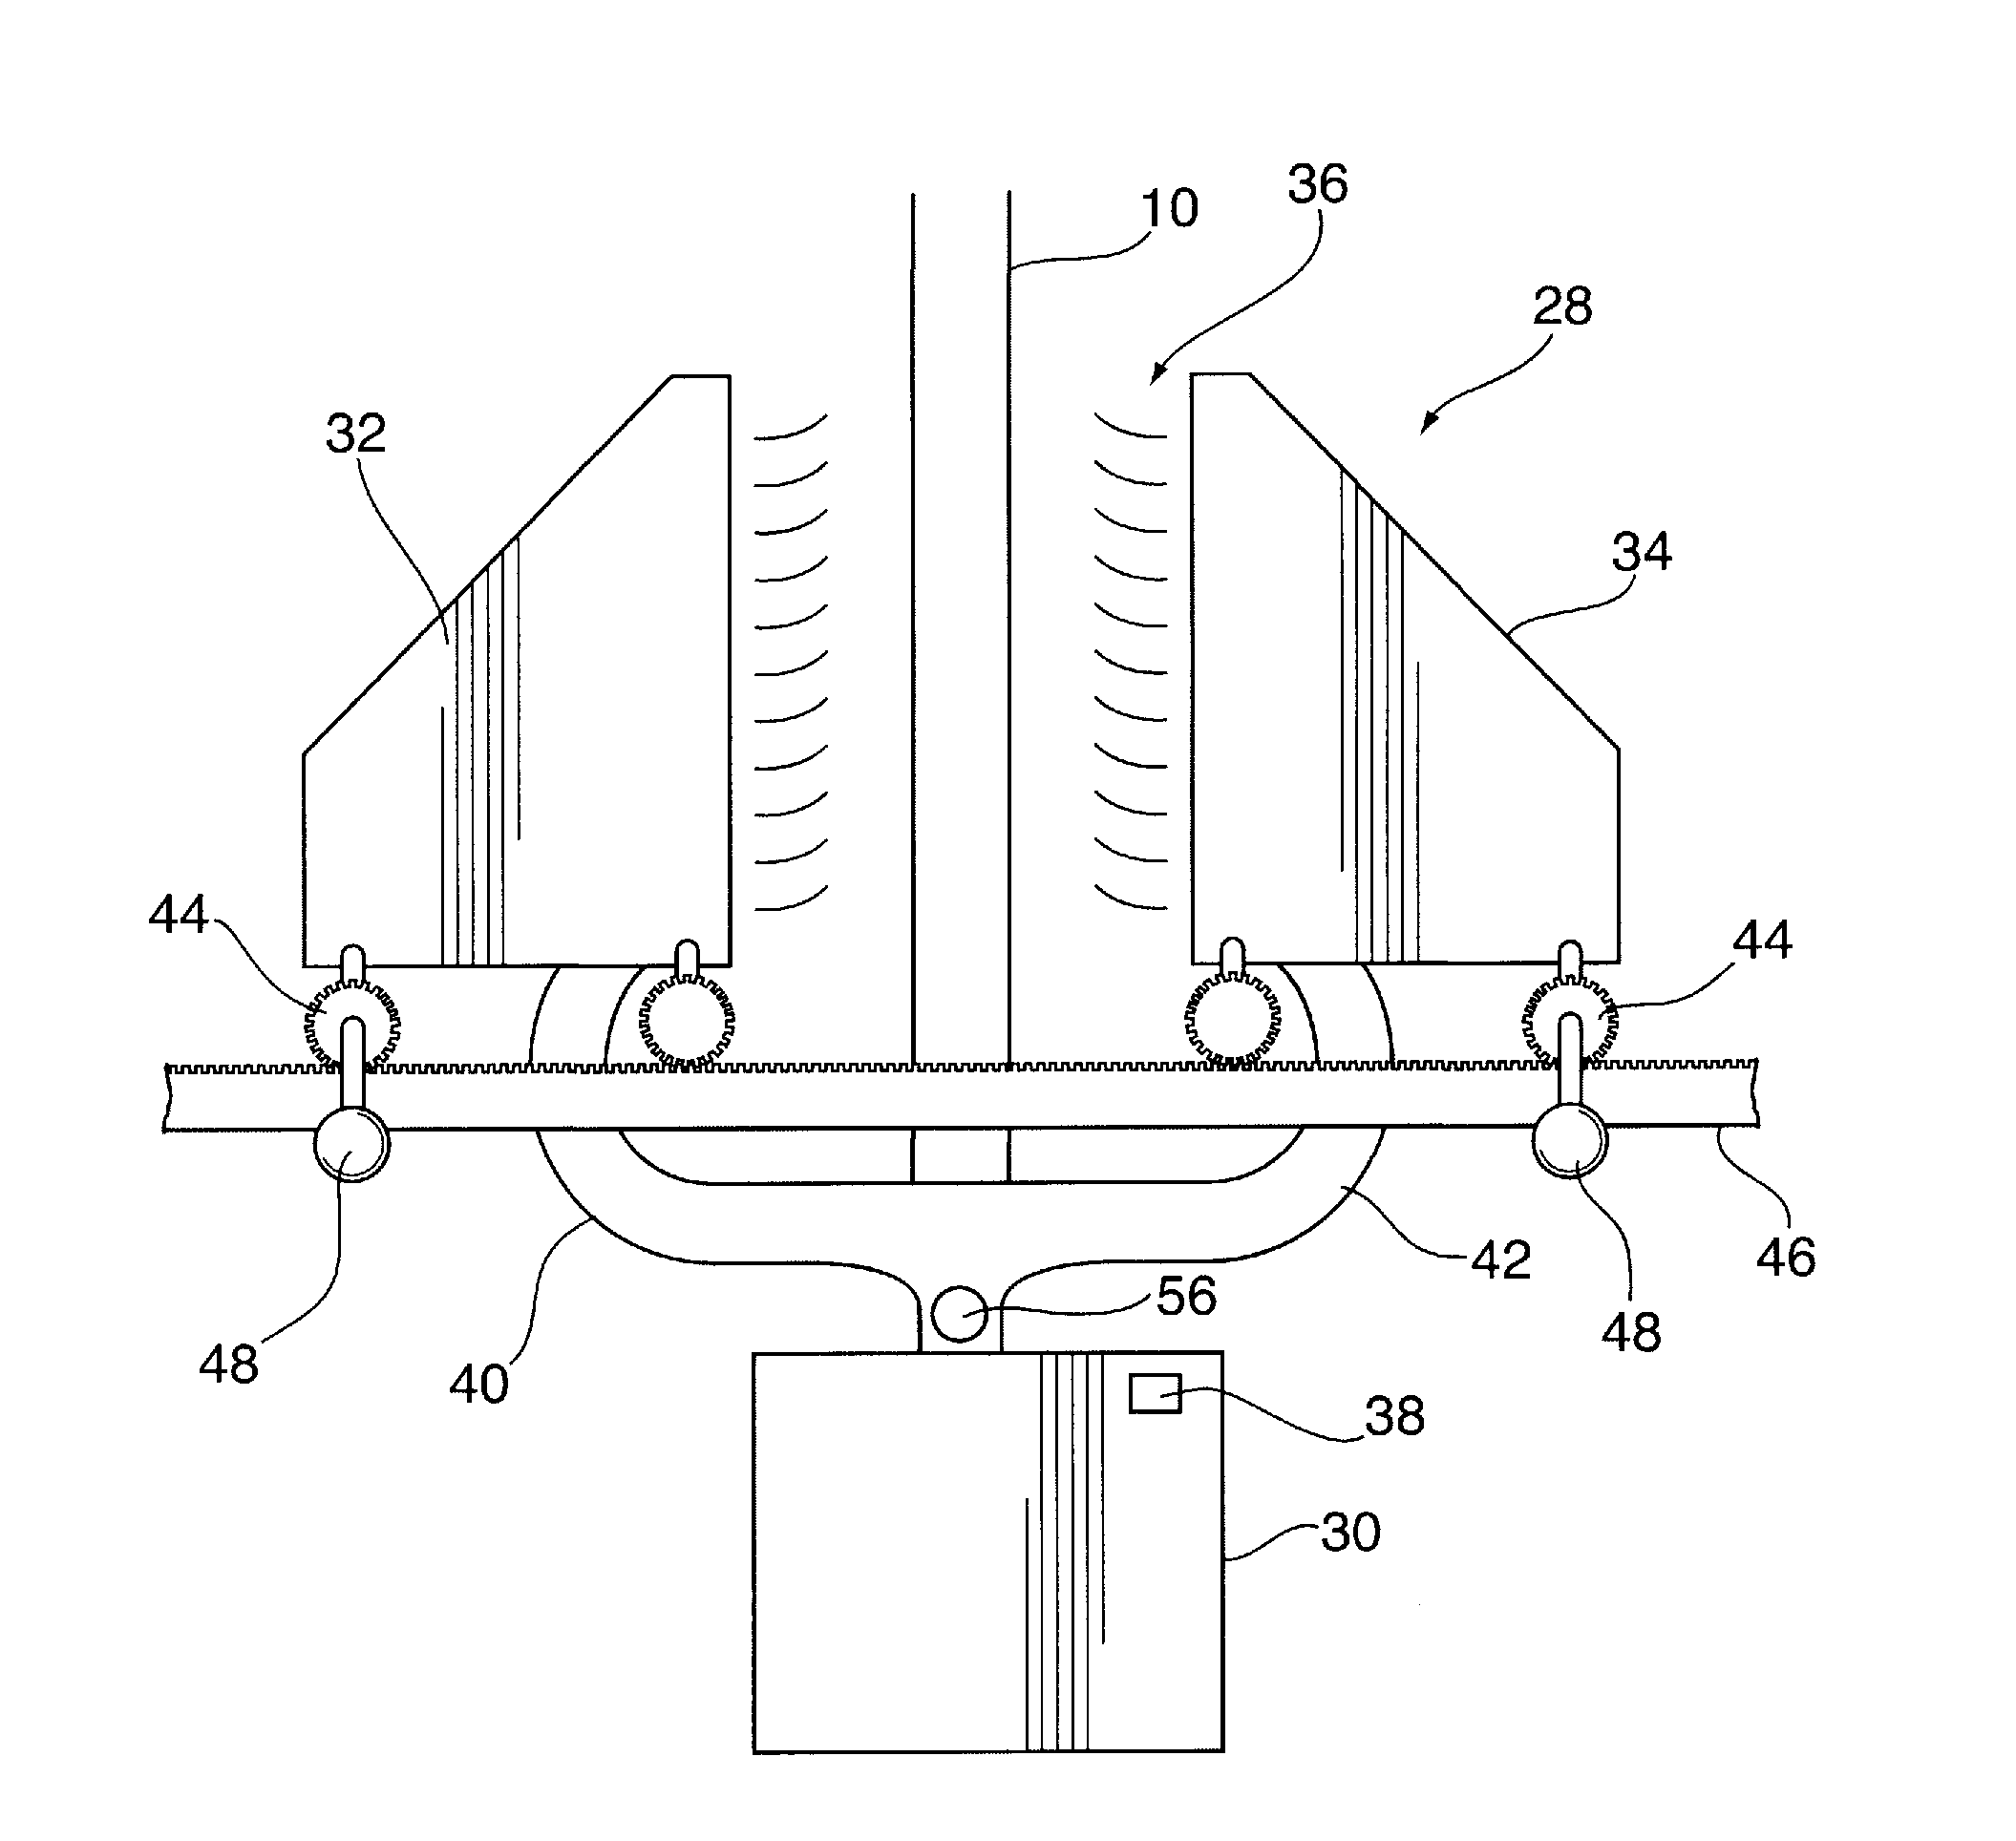 Method of Producing a Coextrusion Blown Film